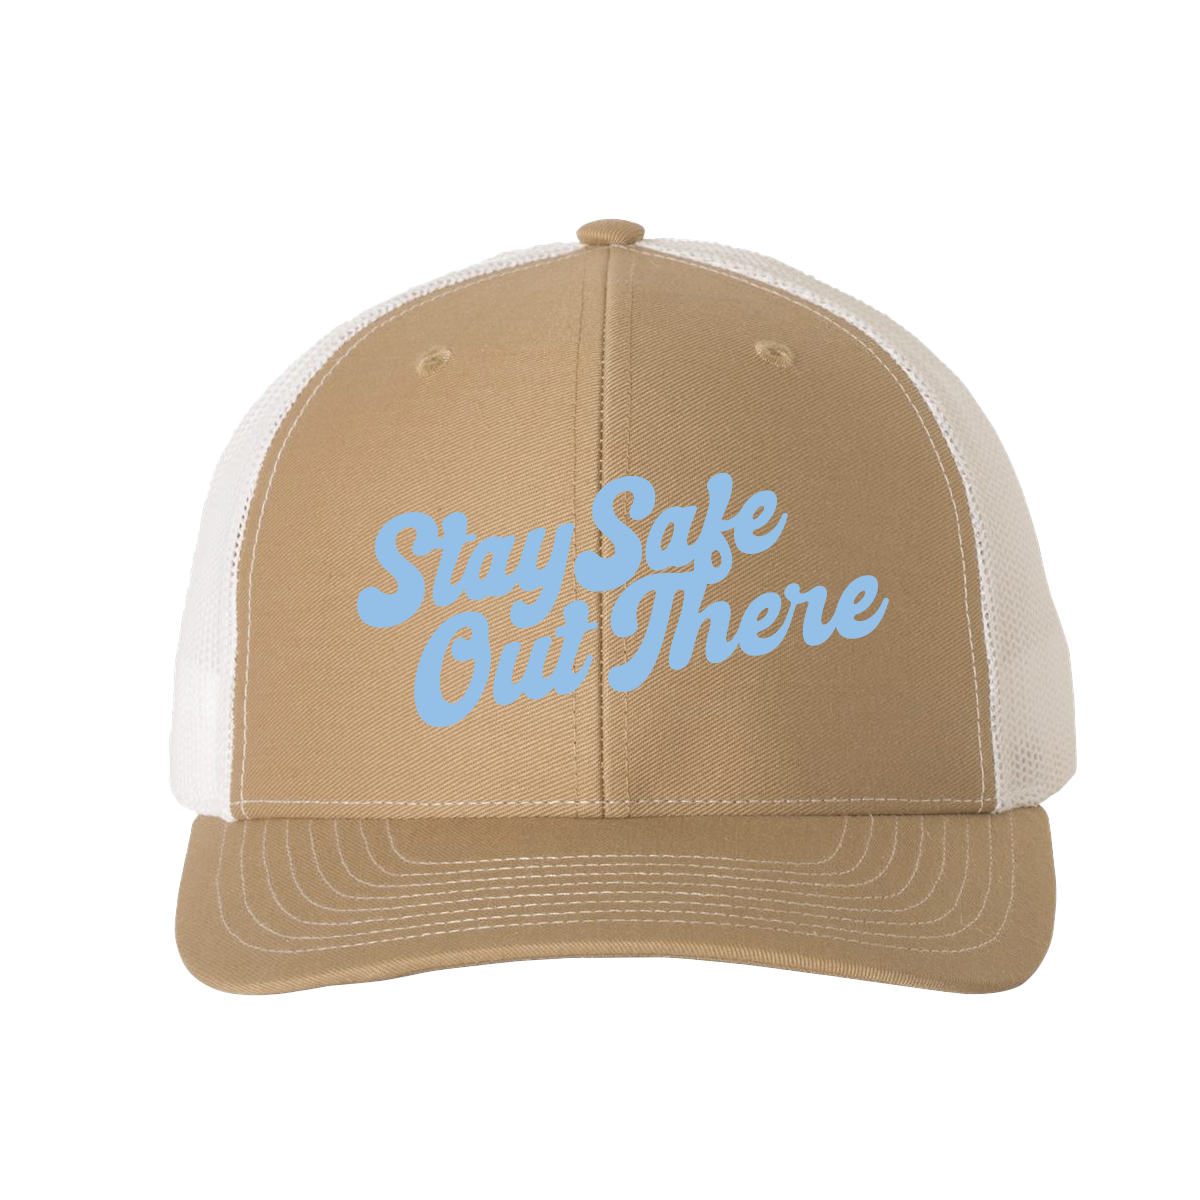 Stay Safe Out There Hat